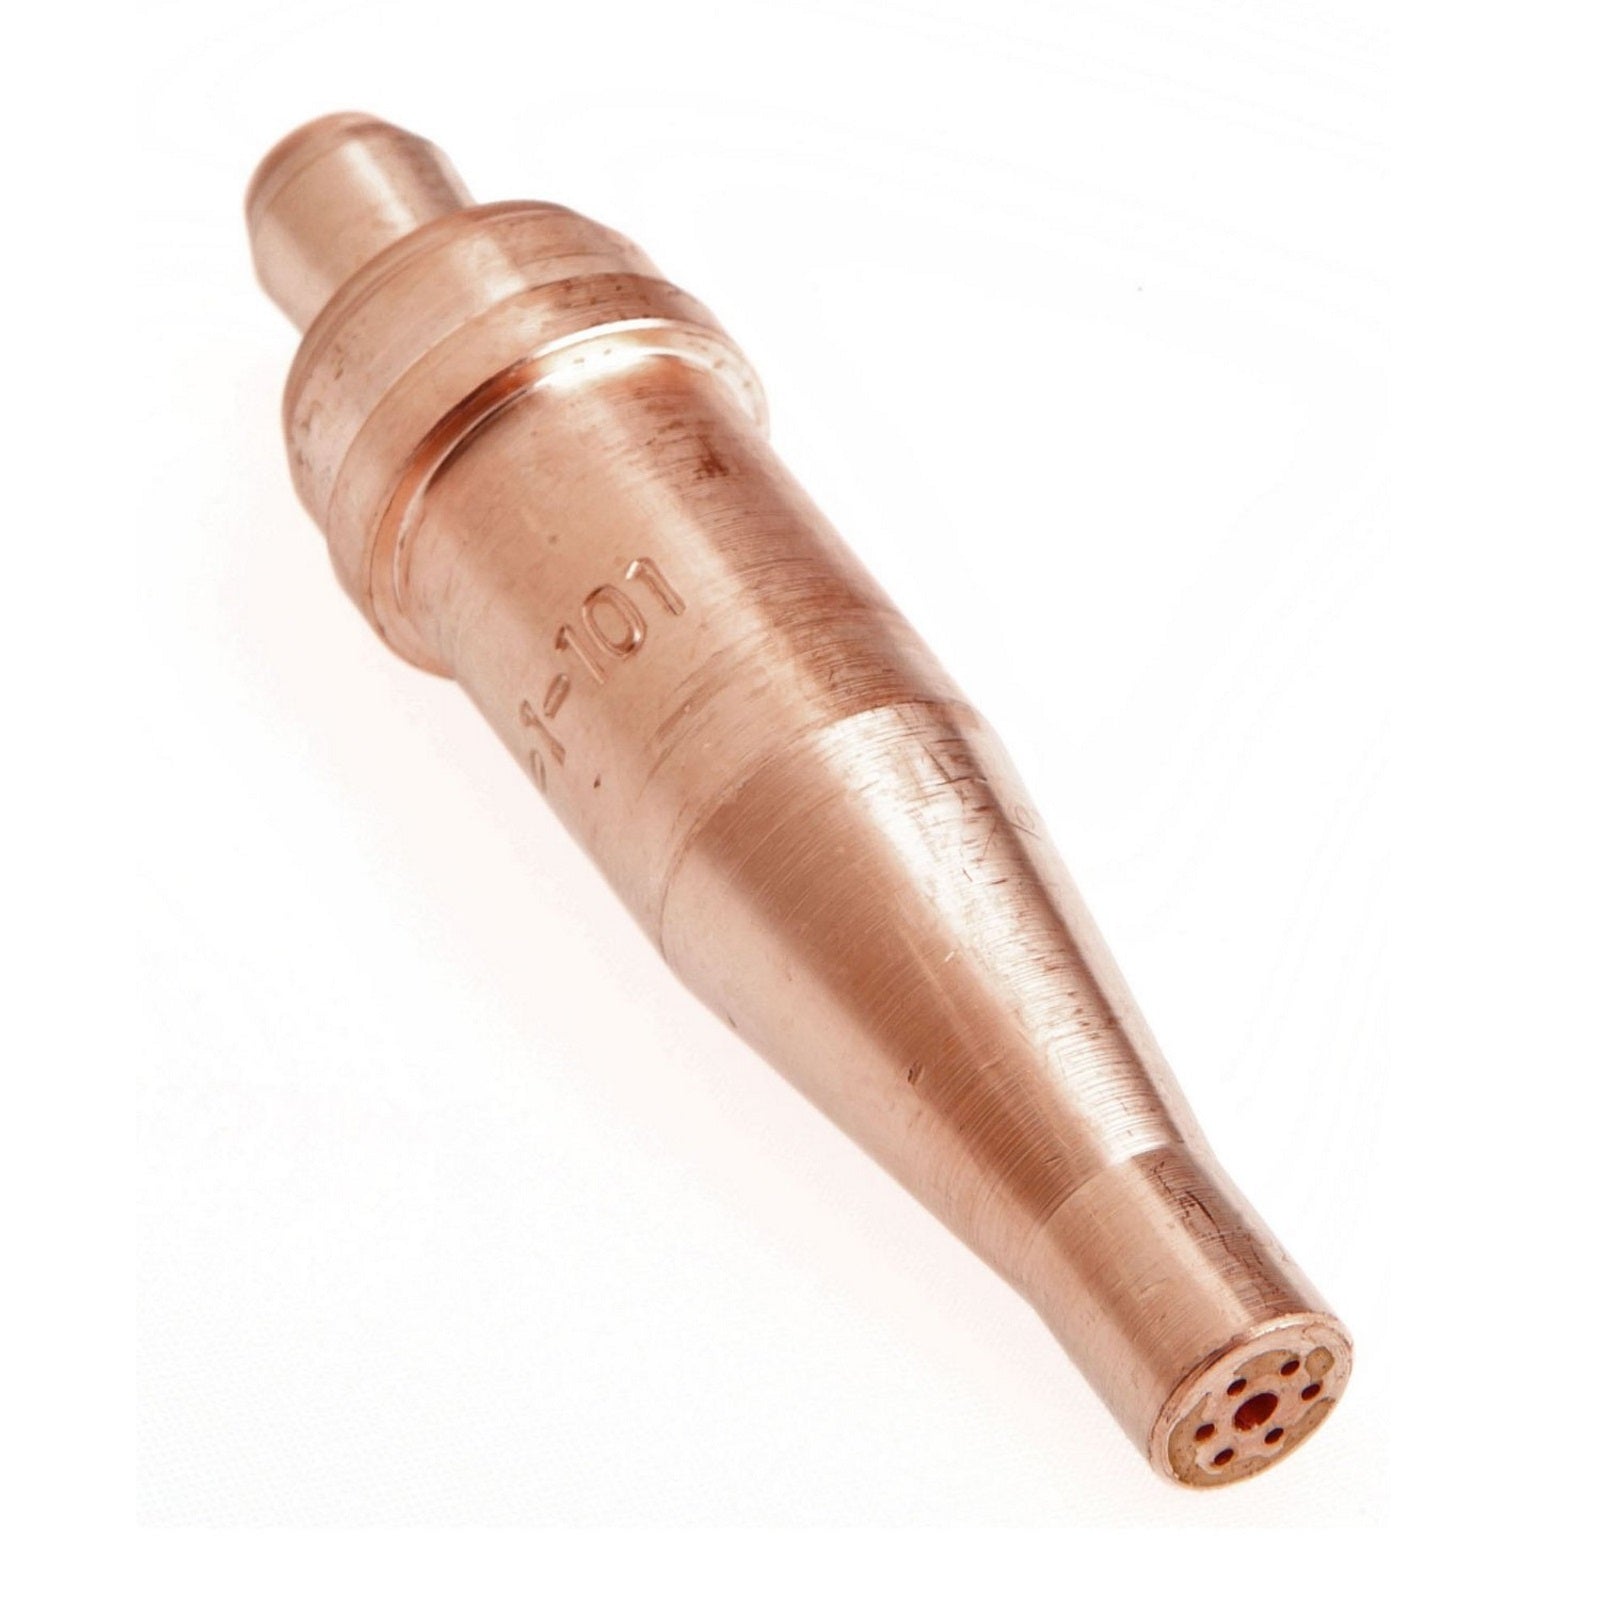 Victor Series 1 Type 101 Acetylene Cutting Tip - Size 7 (0330-0013)